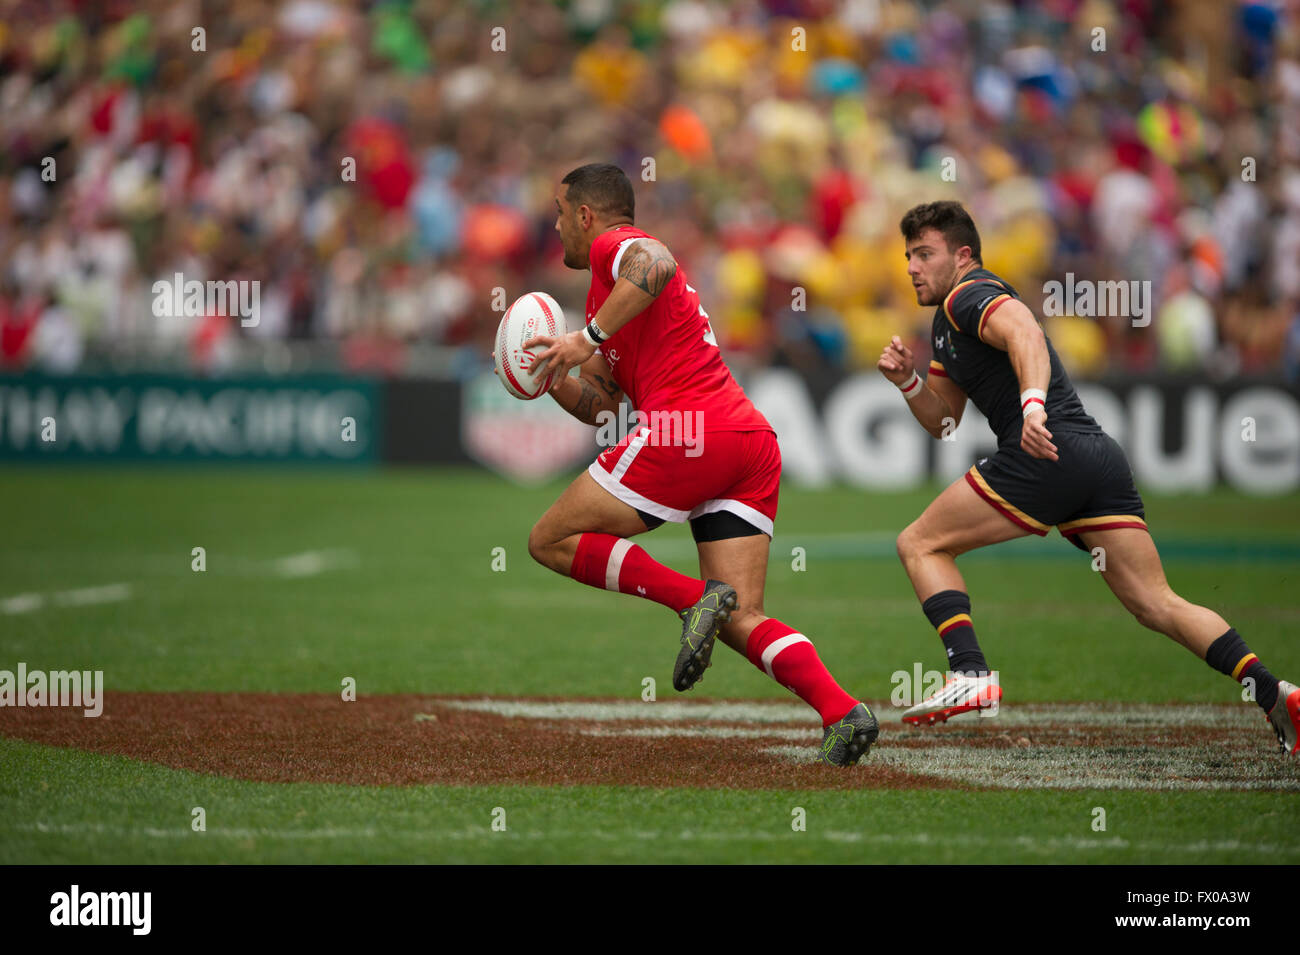 Hong Kong, China. 9, April, 2016. HSBC World Rugby Sevens Series-round 7, Hong Kong Stadium.  Wales vs Canada (red). Wales wins 24-10. Credit:  Gerry Rousseau/Alamy Live News Stock Photo